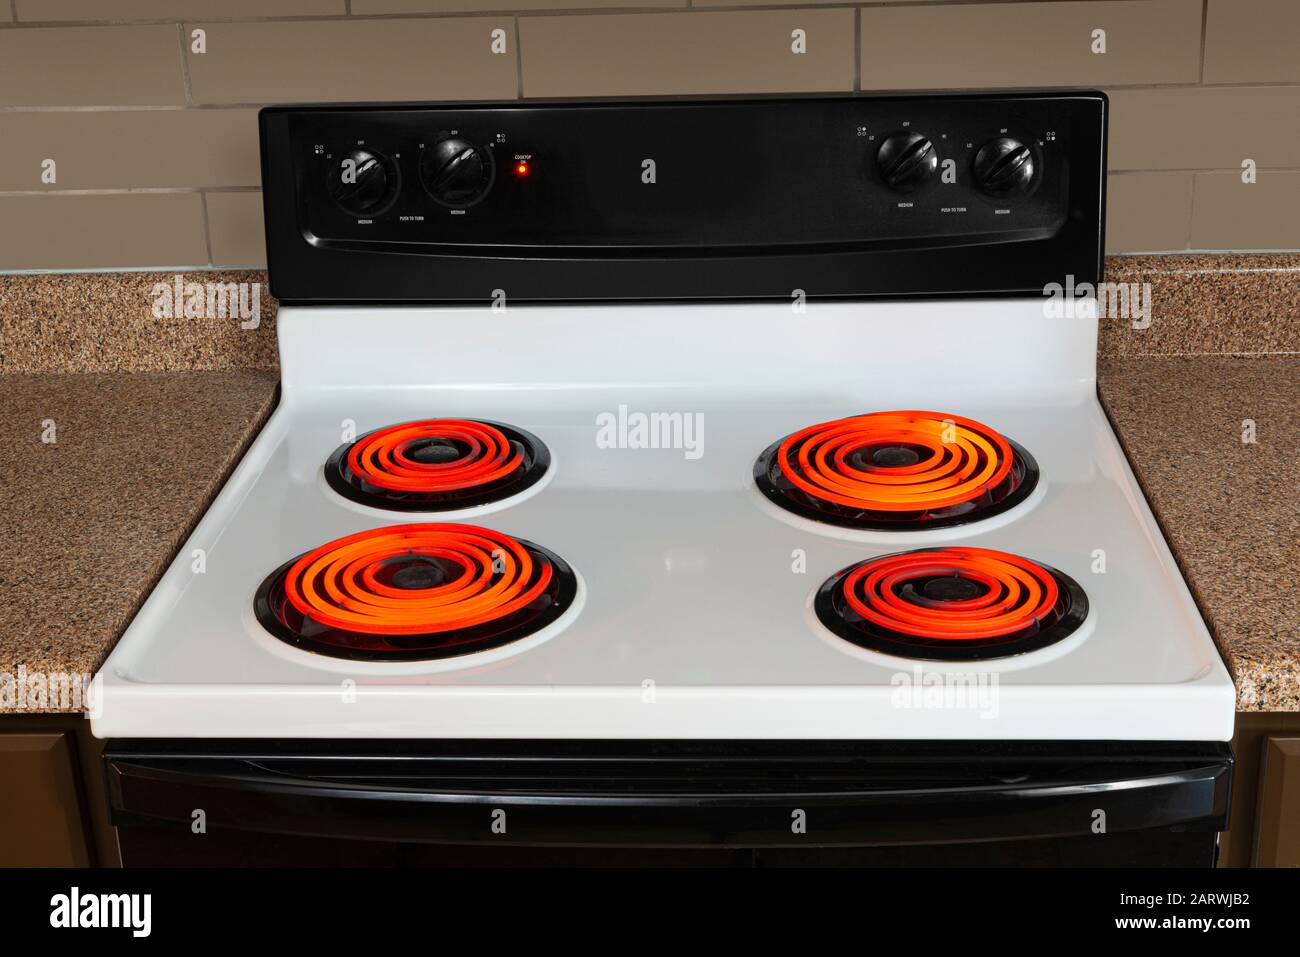 https://c8.alamy.com/comp/2ARWJB2/horizontal-shot-of-the-stovetop-of-an-electric-range-with-all-the-burners-turned-to-high-and-glowing-red-2ARWJB2.jpg